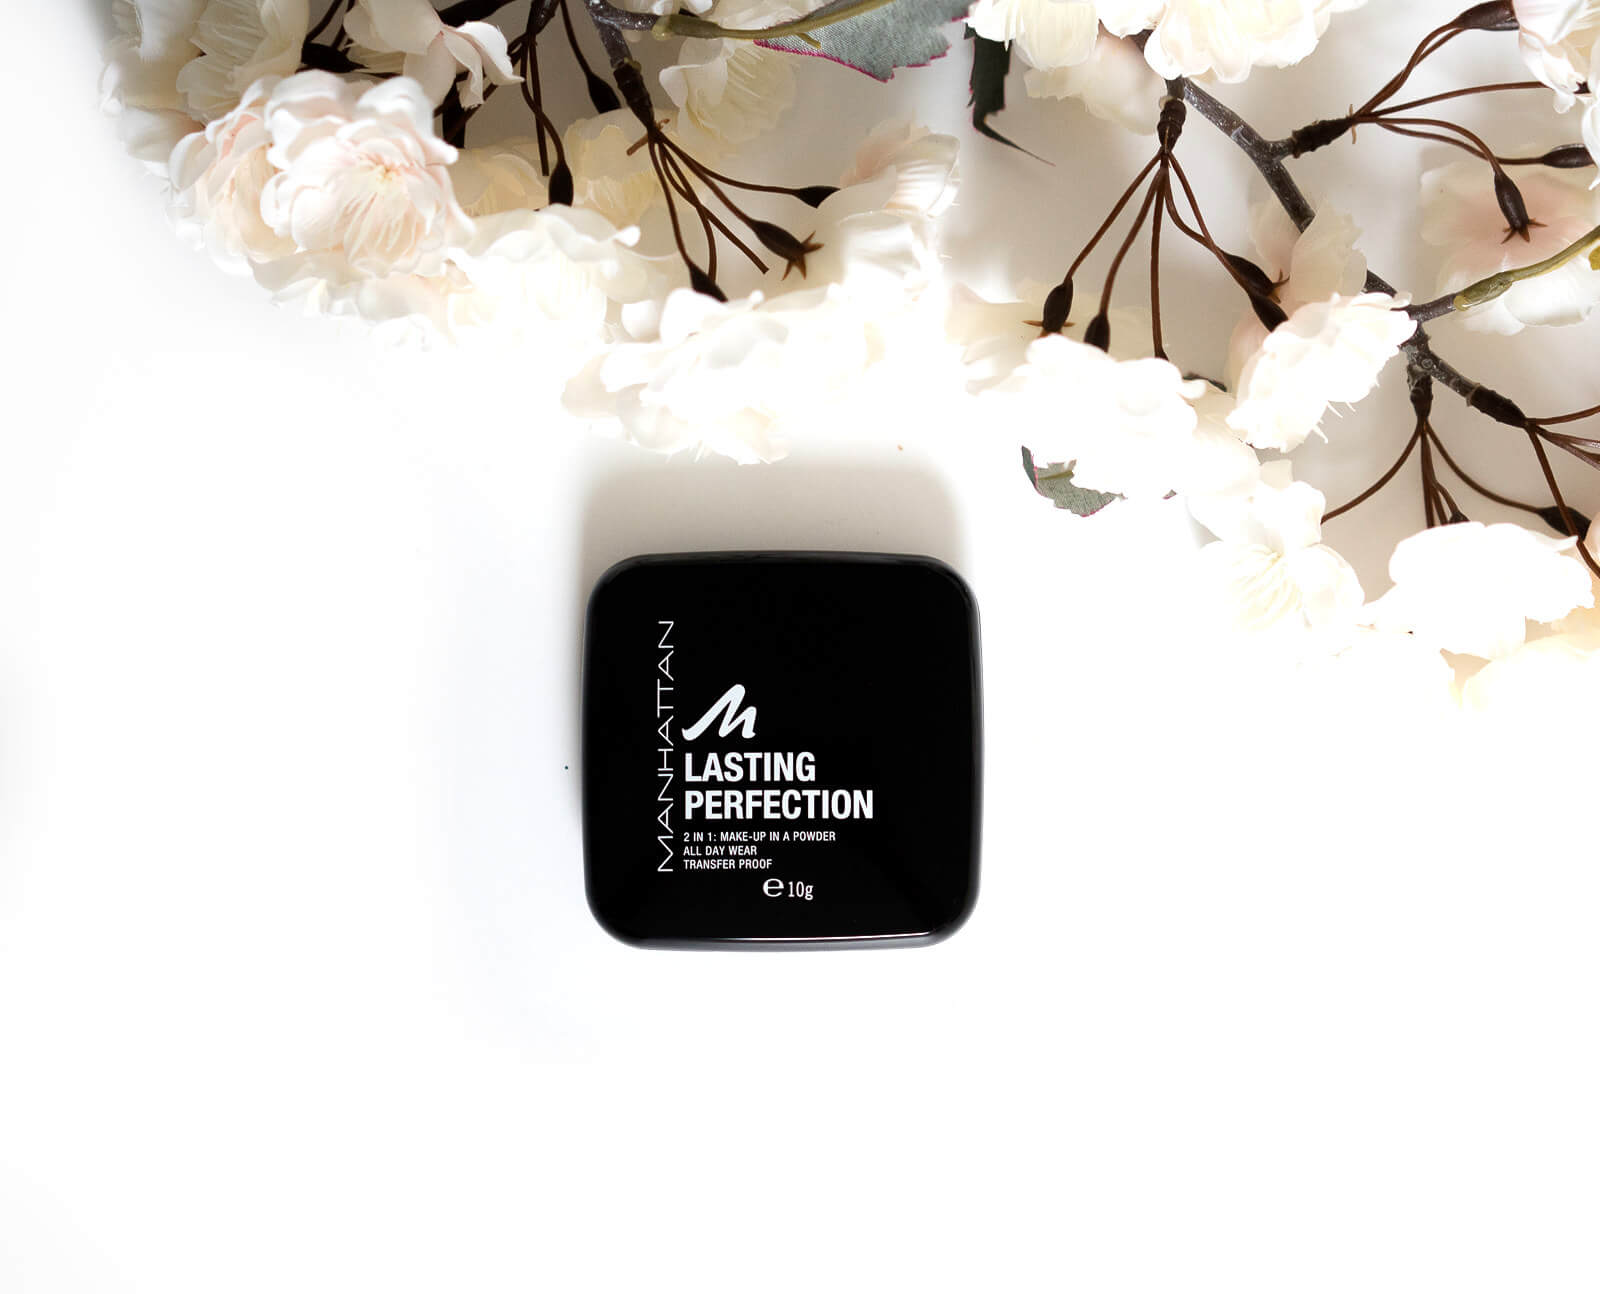 Review - Manhattan Lasting Perfection Compact Puder Make-up im Test 1